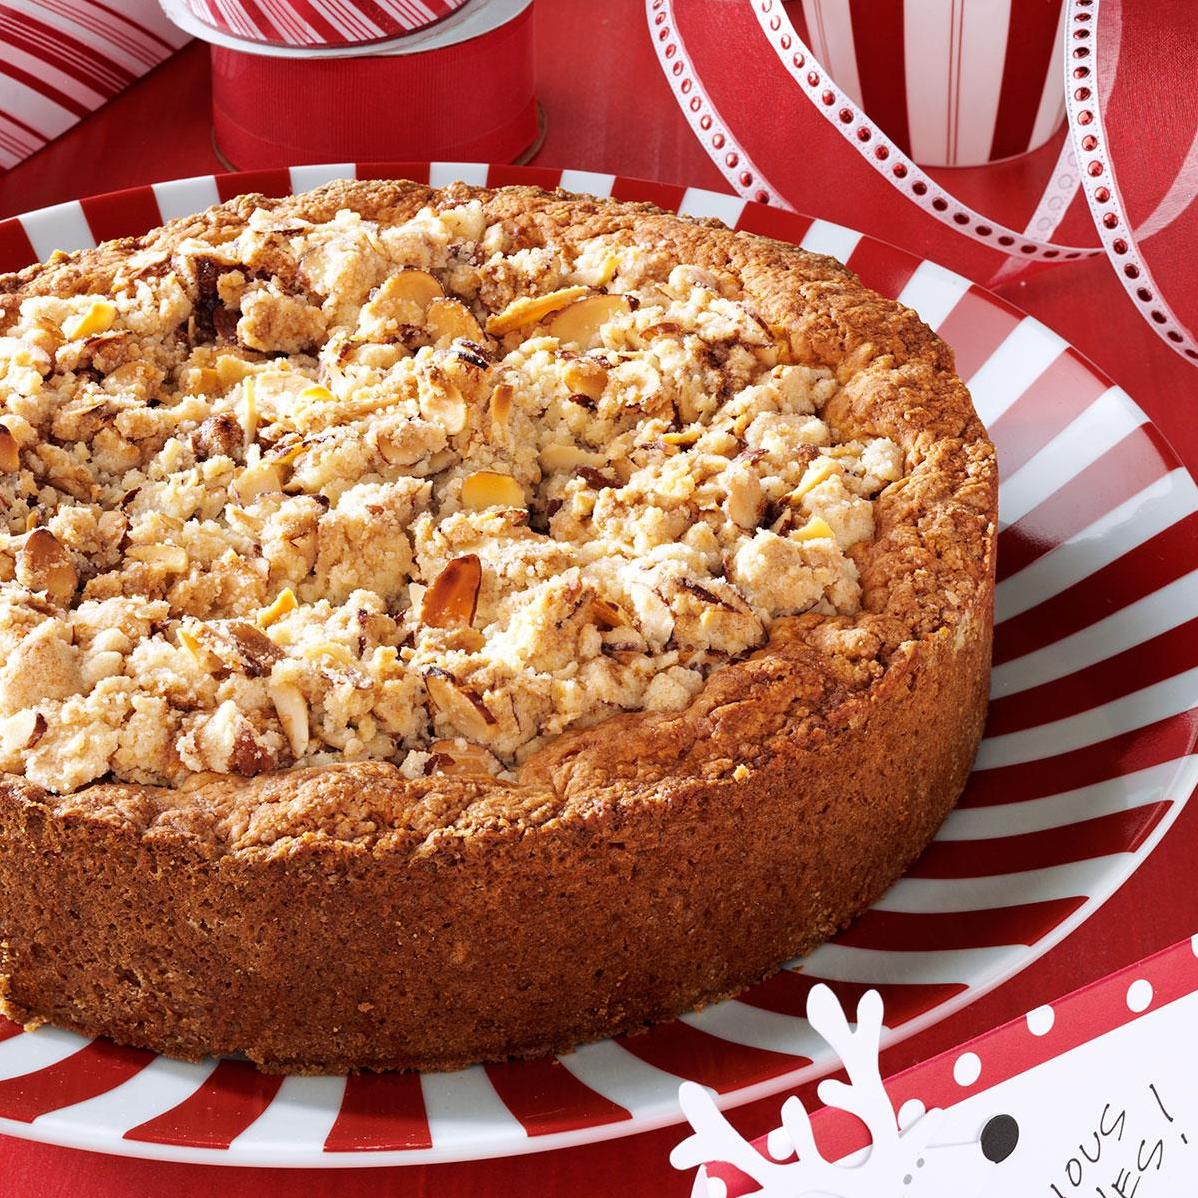  Our cream cheese and raspberry coffee cake is the ultimate breakfast indulgence.